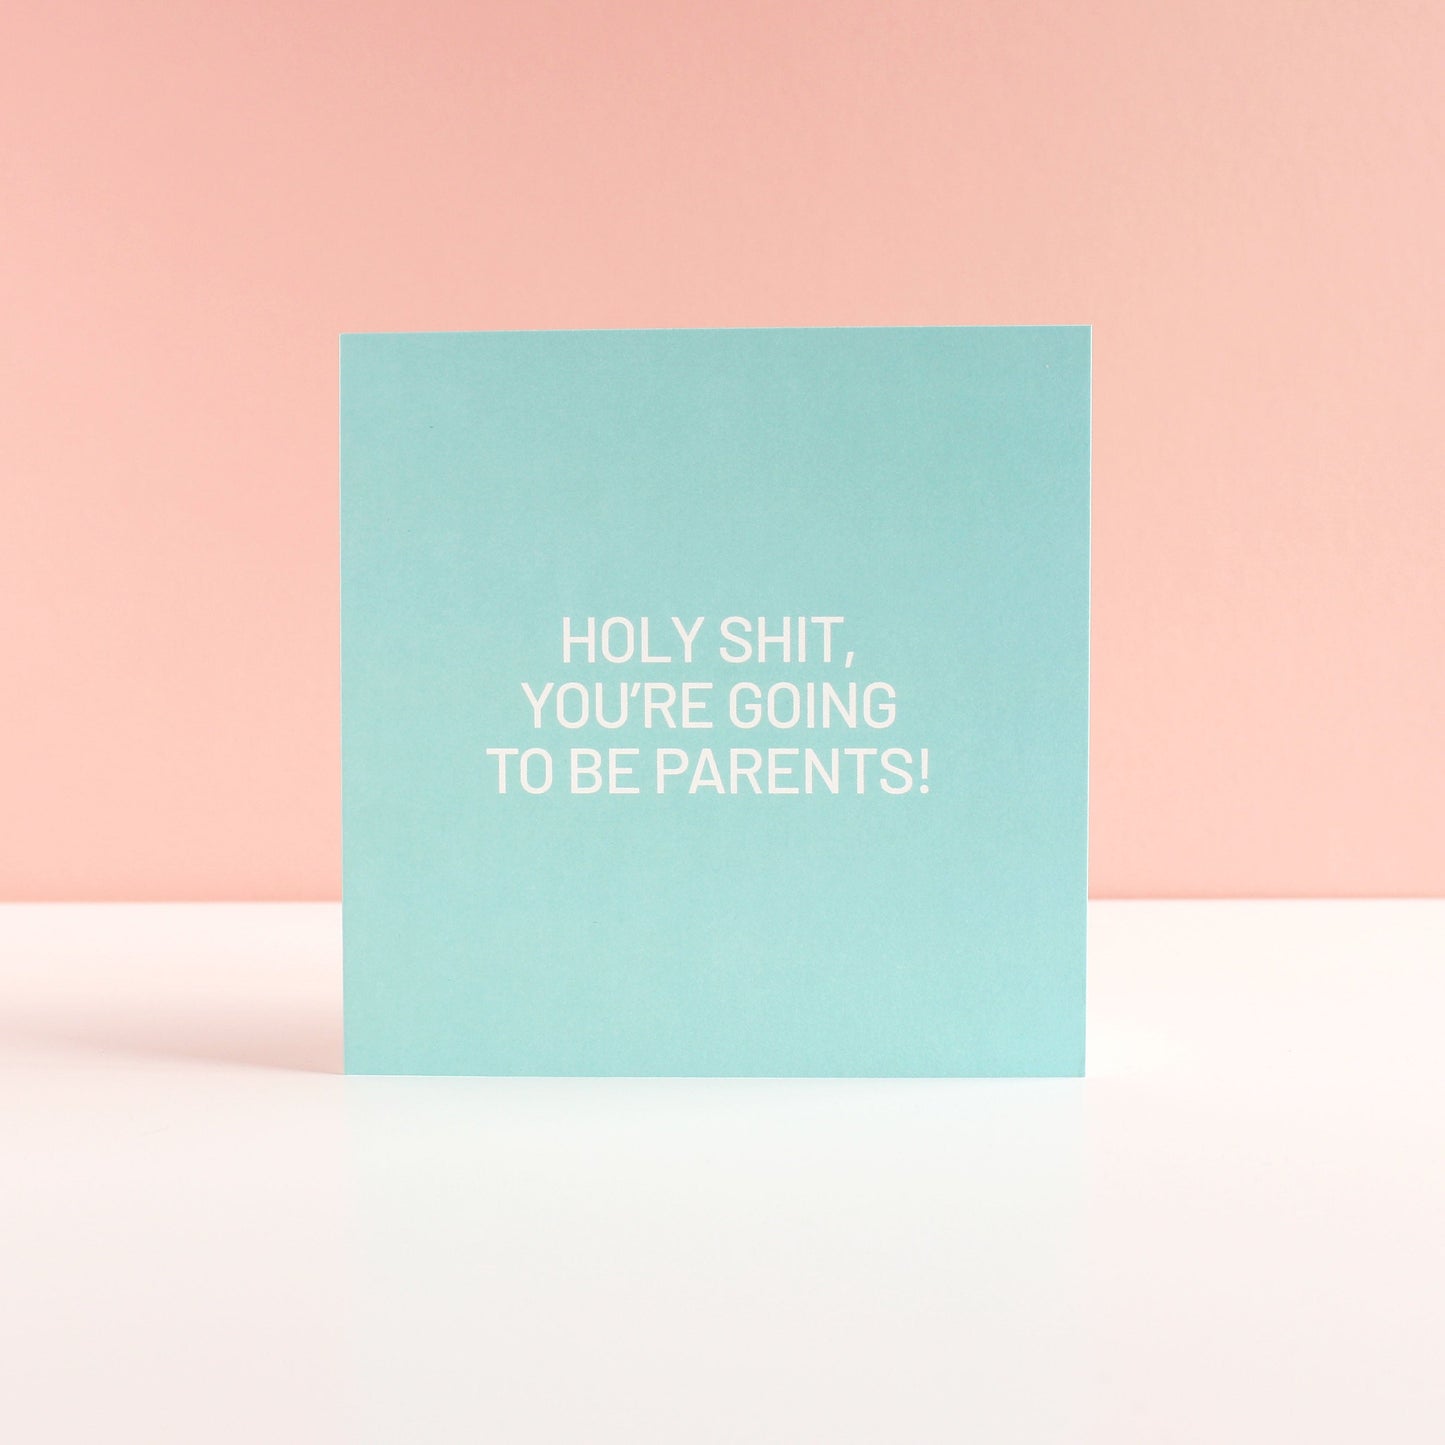 You're going to be parents card